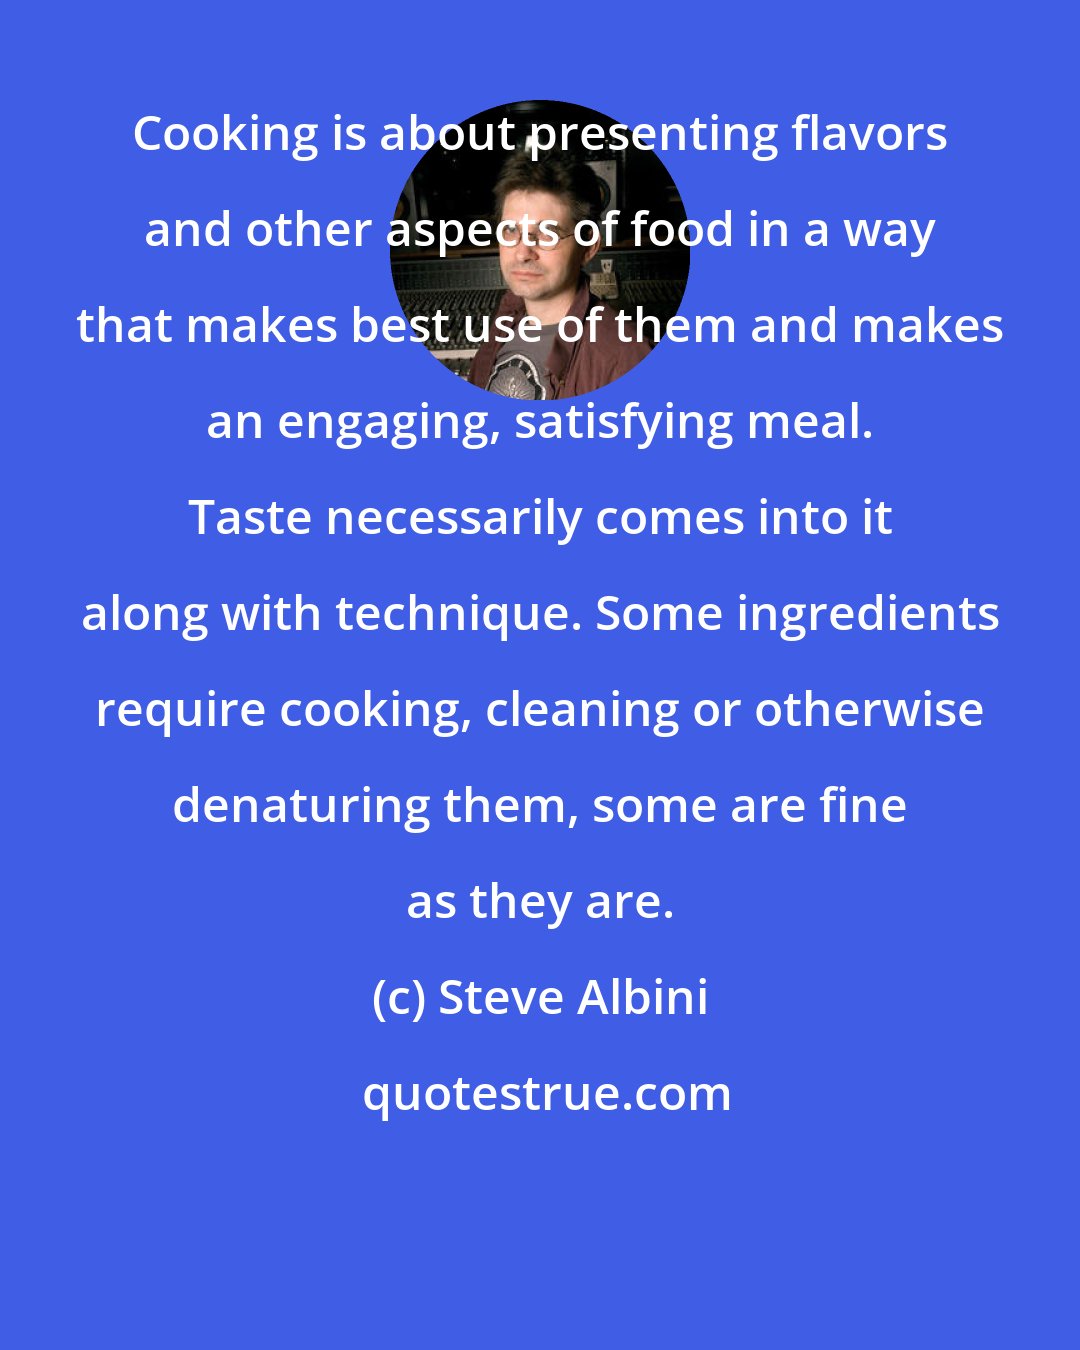 Steve Albini: Cooking is about presenting flavors and other aspects of food in a way that makes best use of them and makes an engaging, satisfying meal. Taste necessarily comes into it along with technique. Some ingredients require cooking, cleaning or otherwise denaturing them, some are fine as they are.